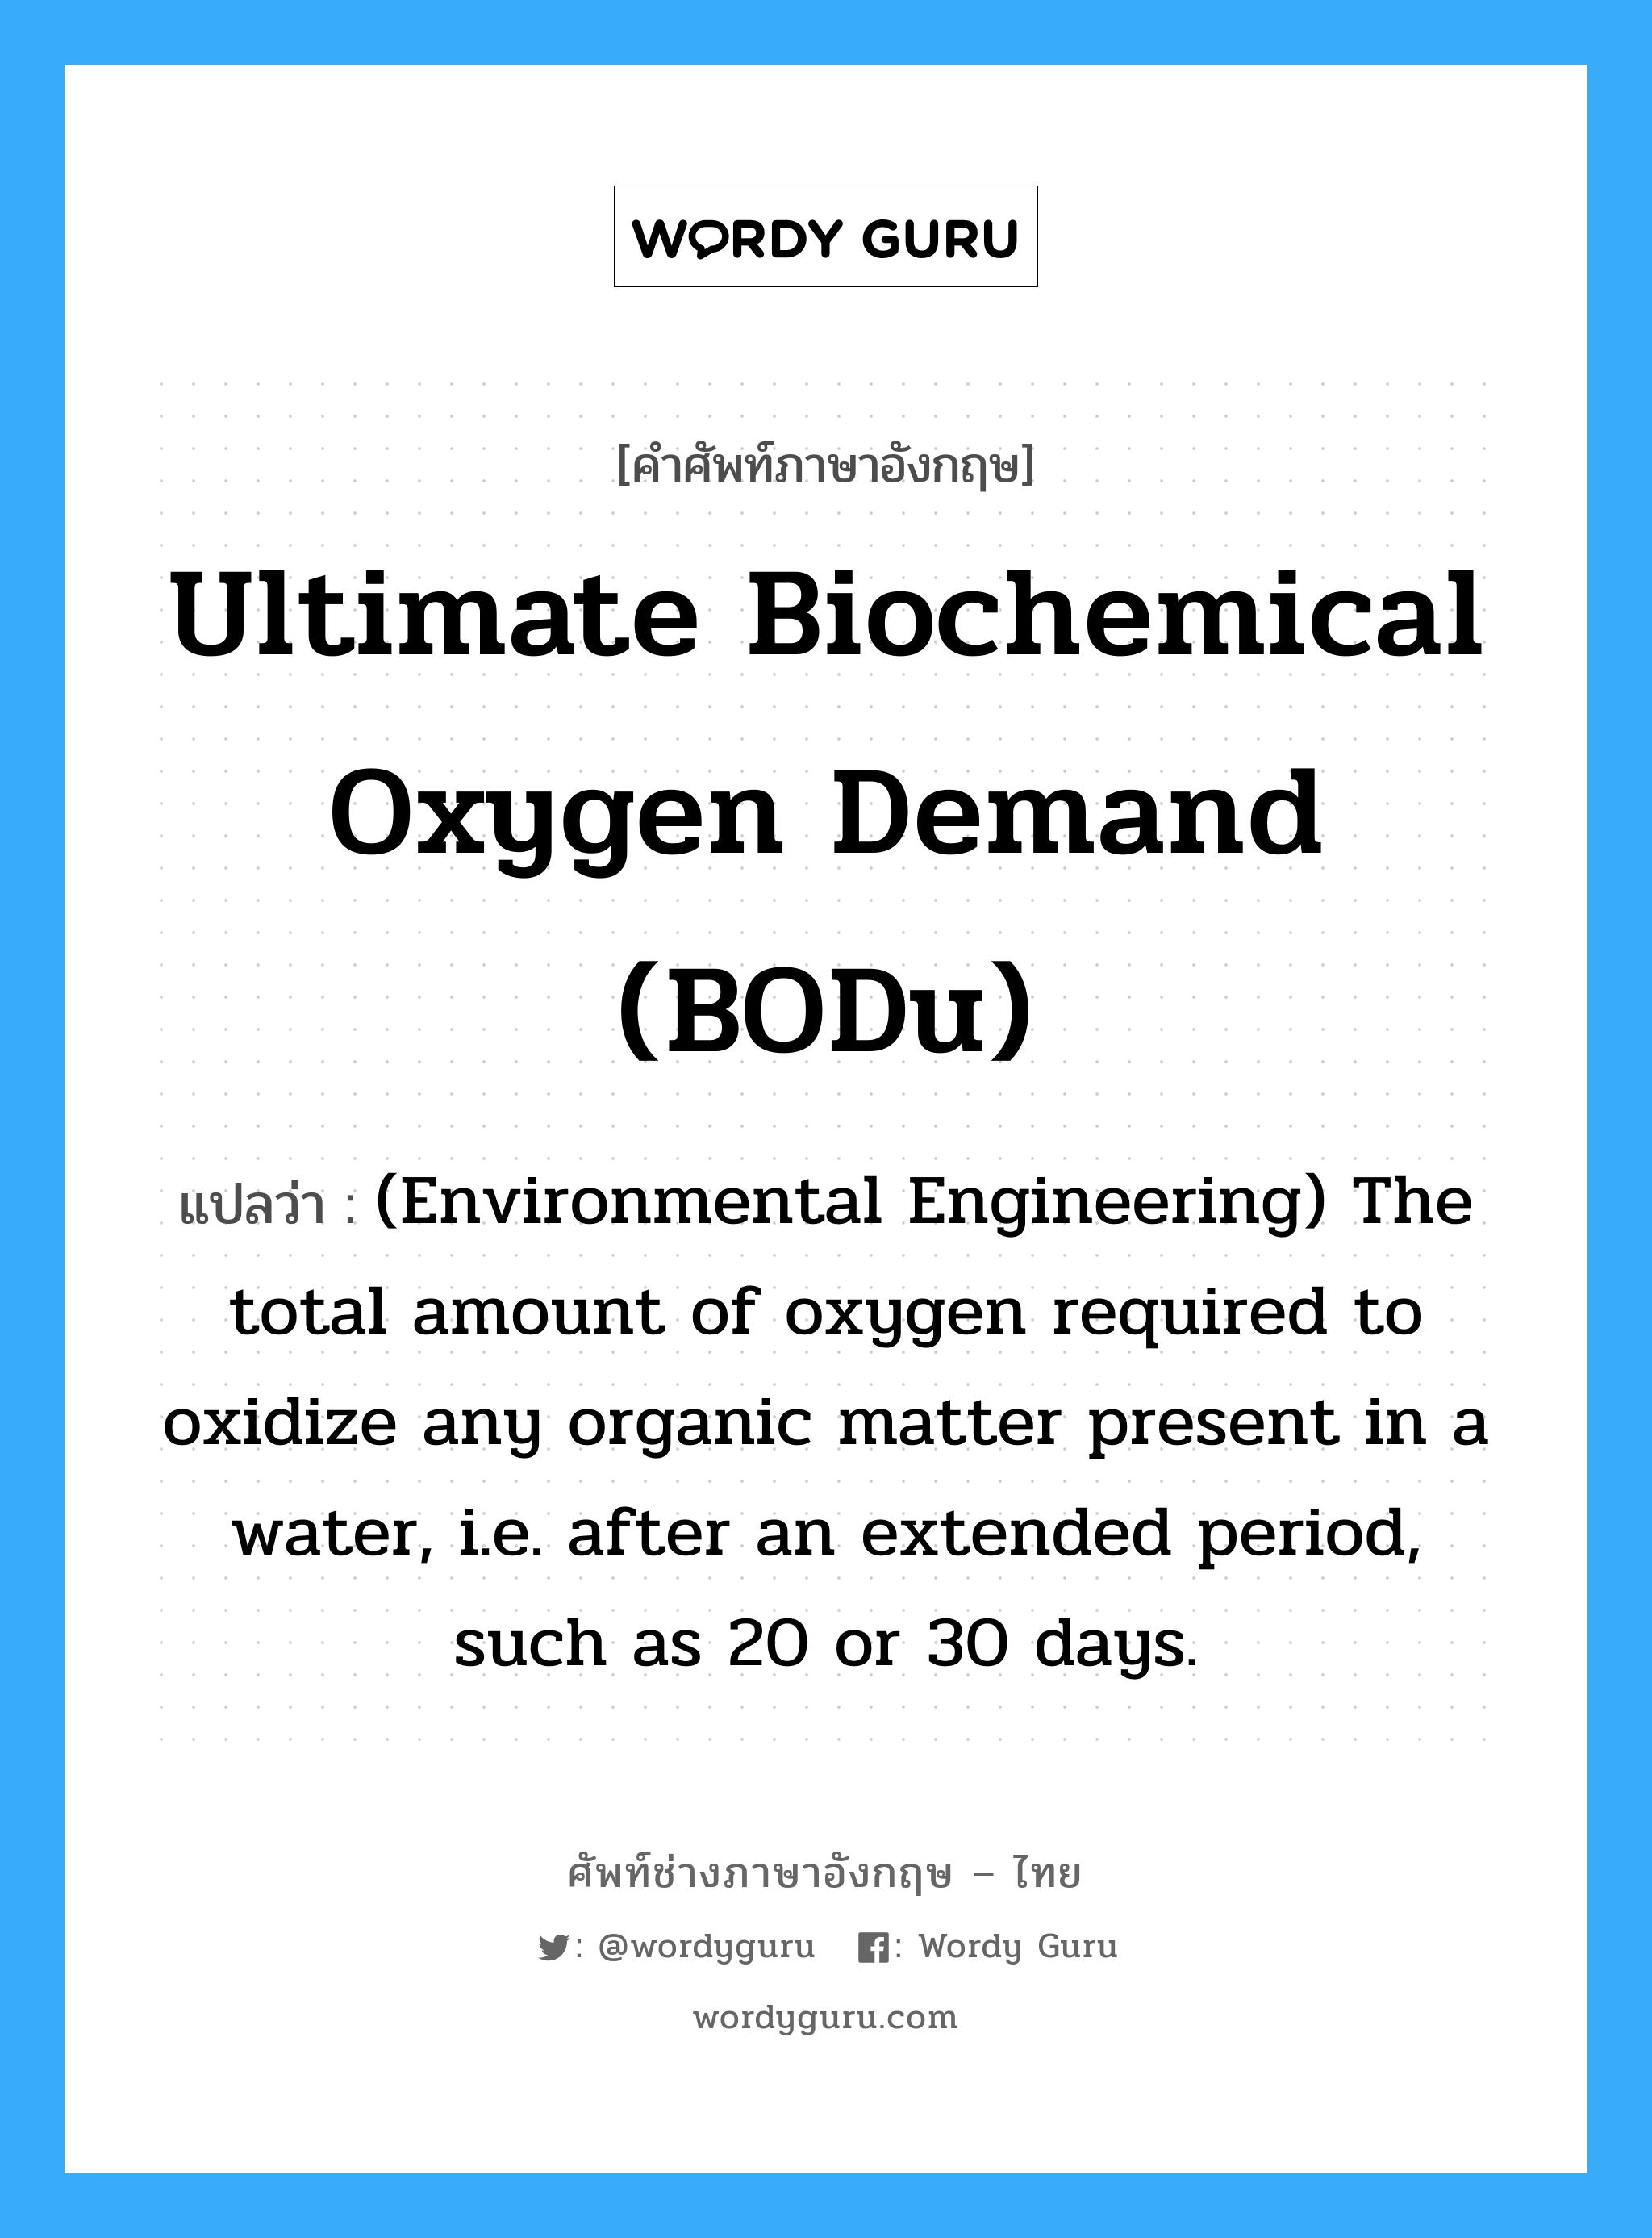 (Environmental Engineering) The total amount of oxygen required to oxidize any organic matter present in a water, i.e. after an extended period, such as 20 or 30 days. ภาษาอังกฤษ?, คำศัพท์ช่างภาษาอังกฤษ - ไทย (Environmental Engineering) The total amount of oxygen required to oxidize any organic matter present in a water, i.e. after an extended period, such as 20 or 30 days. คำศัพท์ภาษาอังกฤษ (Environmental Engineering) The total amount of oxygen required to oxidize any organic matter present in a water, i.e. after an extended period, such as 20 or 30 days. แปลว่า Ultimate biochemical oxygen demand (BODu)